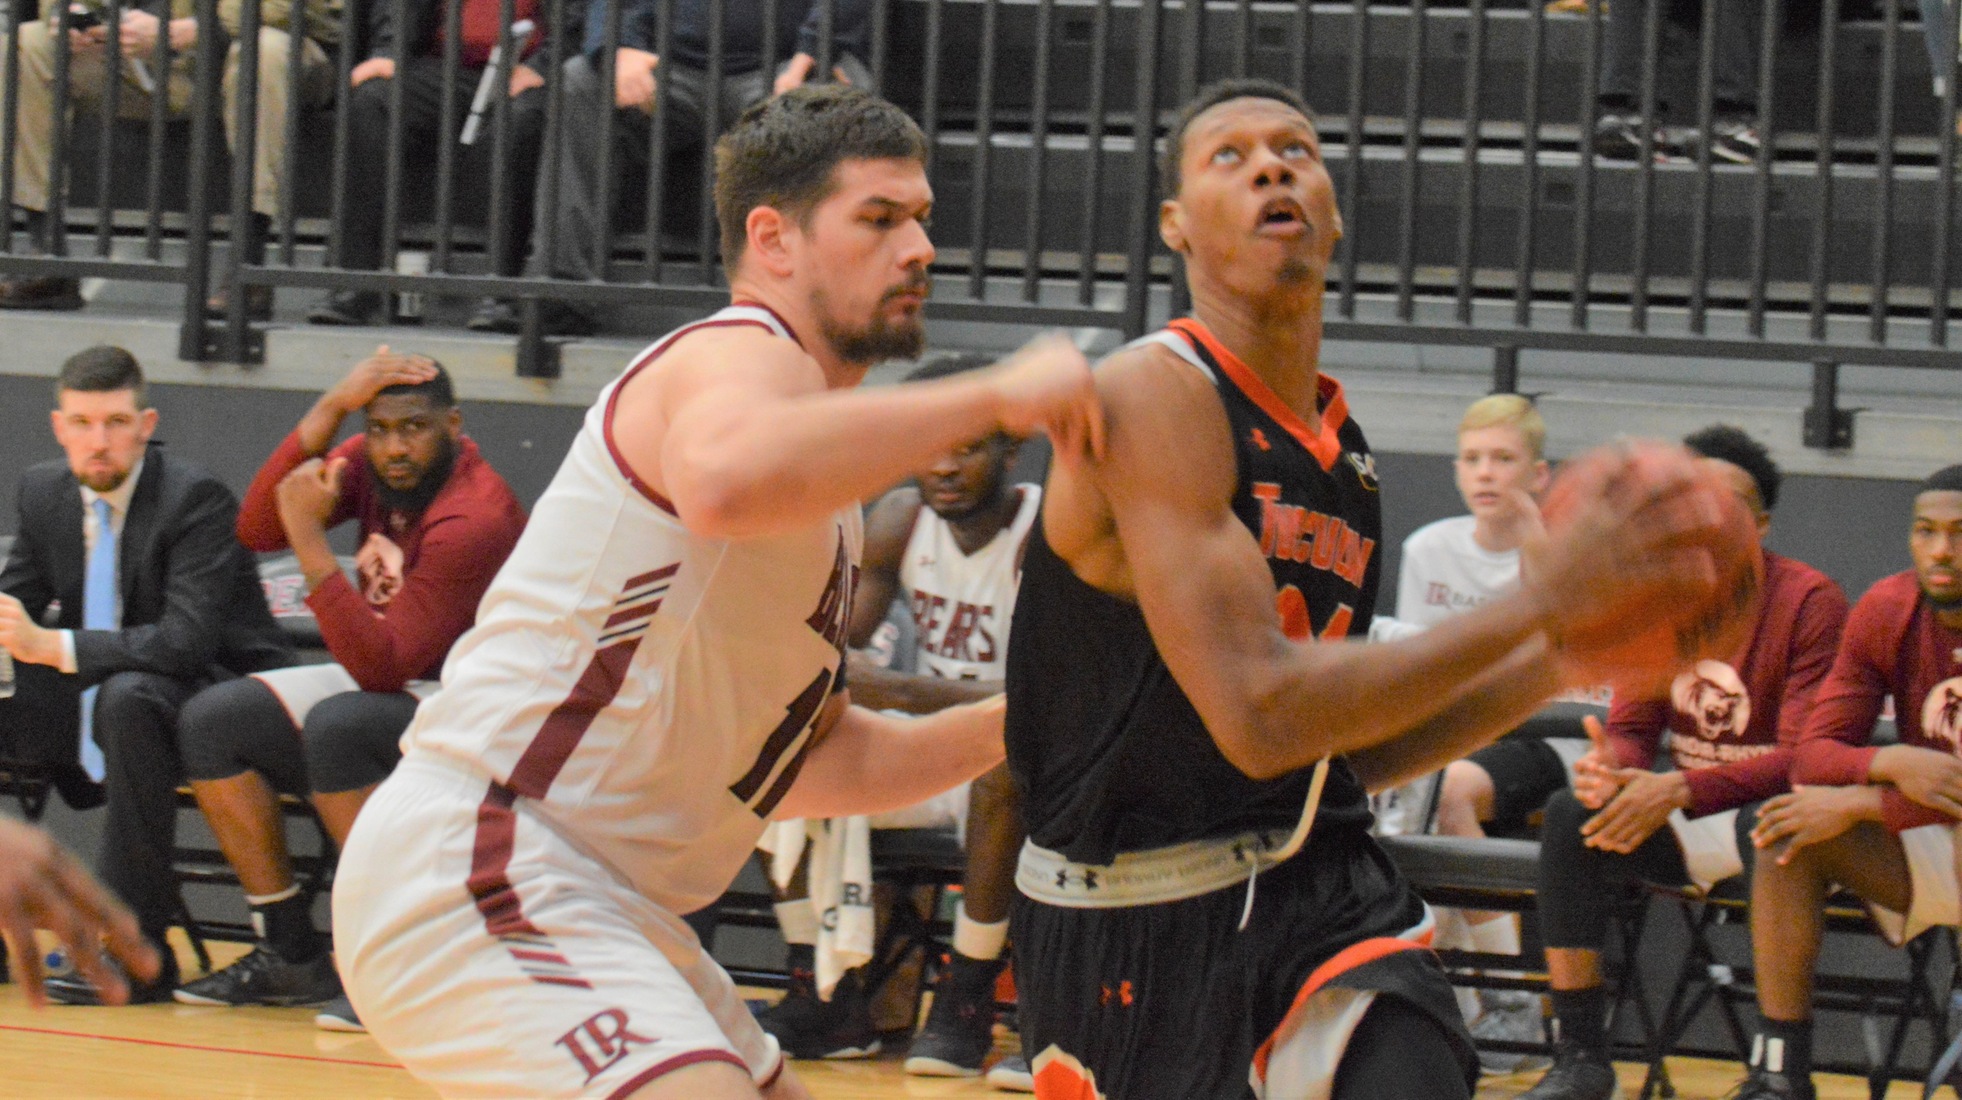 Brandon Mitchell scored a career-high 20 points in Tusculum's SAC road game at Lenoir-Rhyne